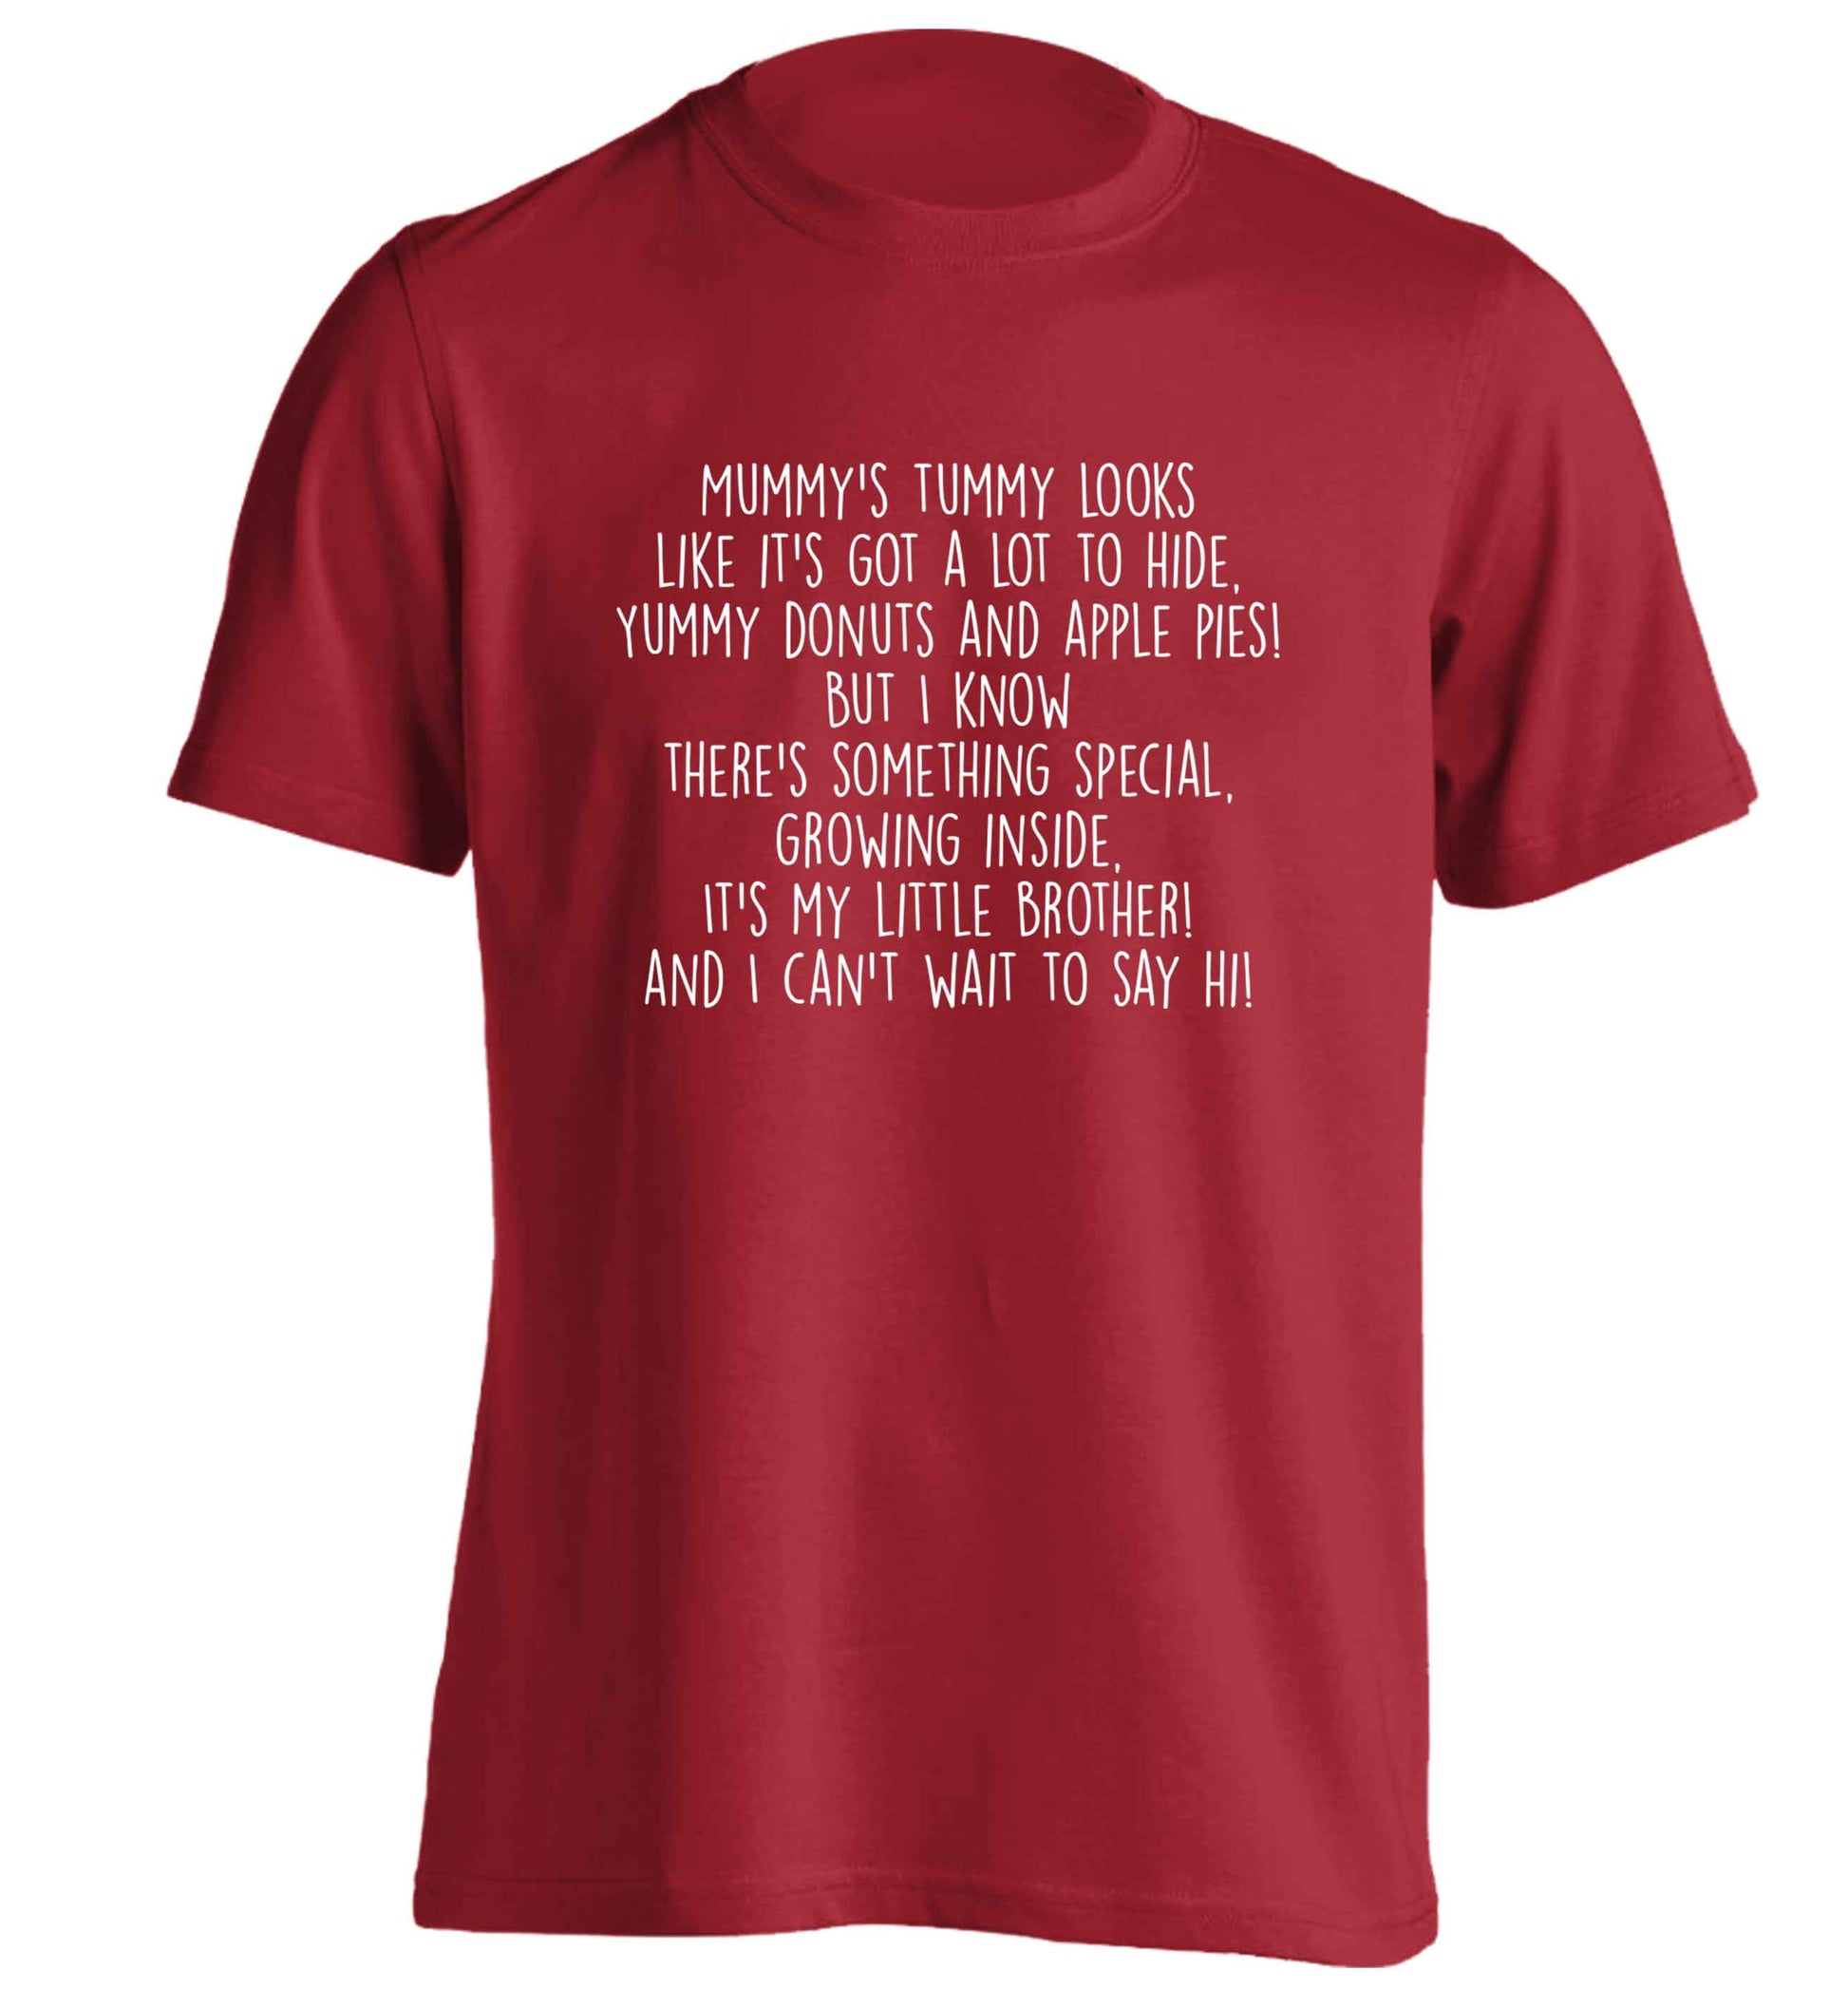 Something special growing inside it's my little brother I can't wait to say hi! adults unisex red Tshirt 2XL